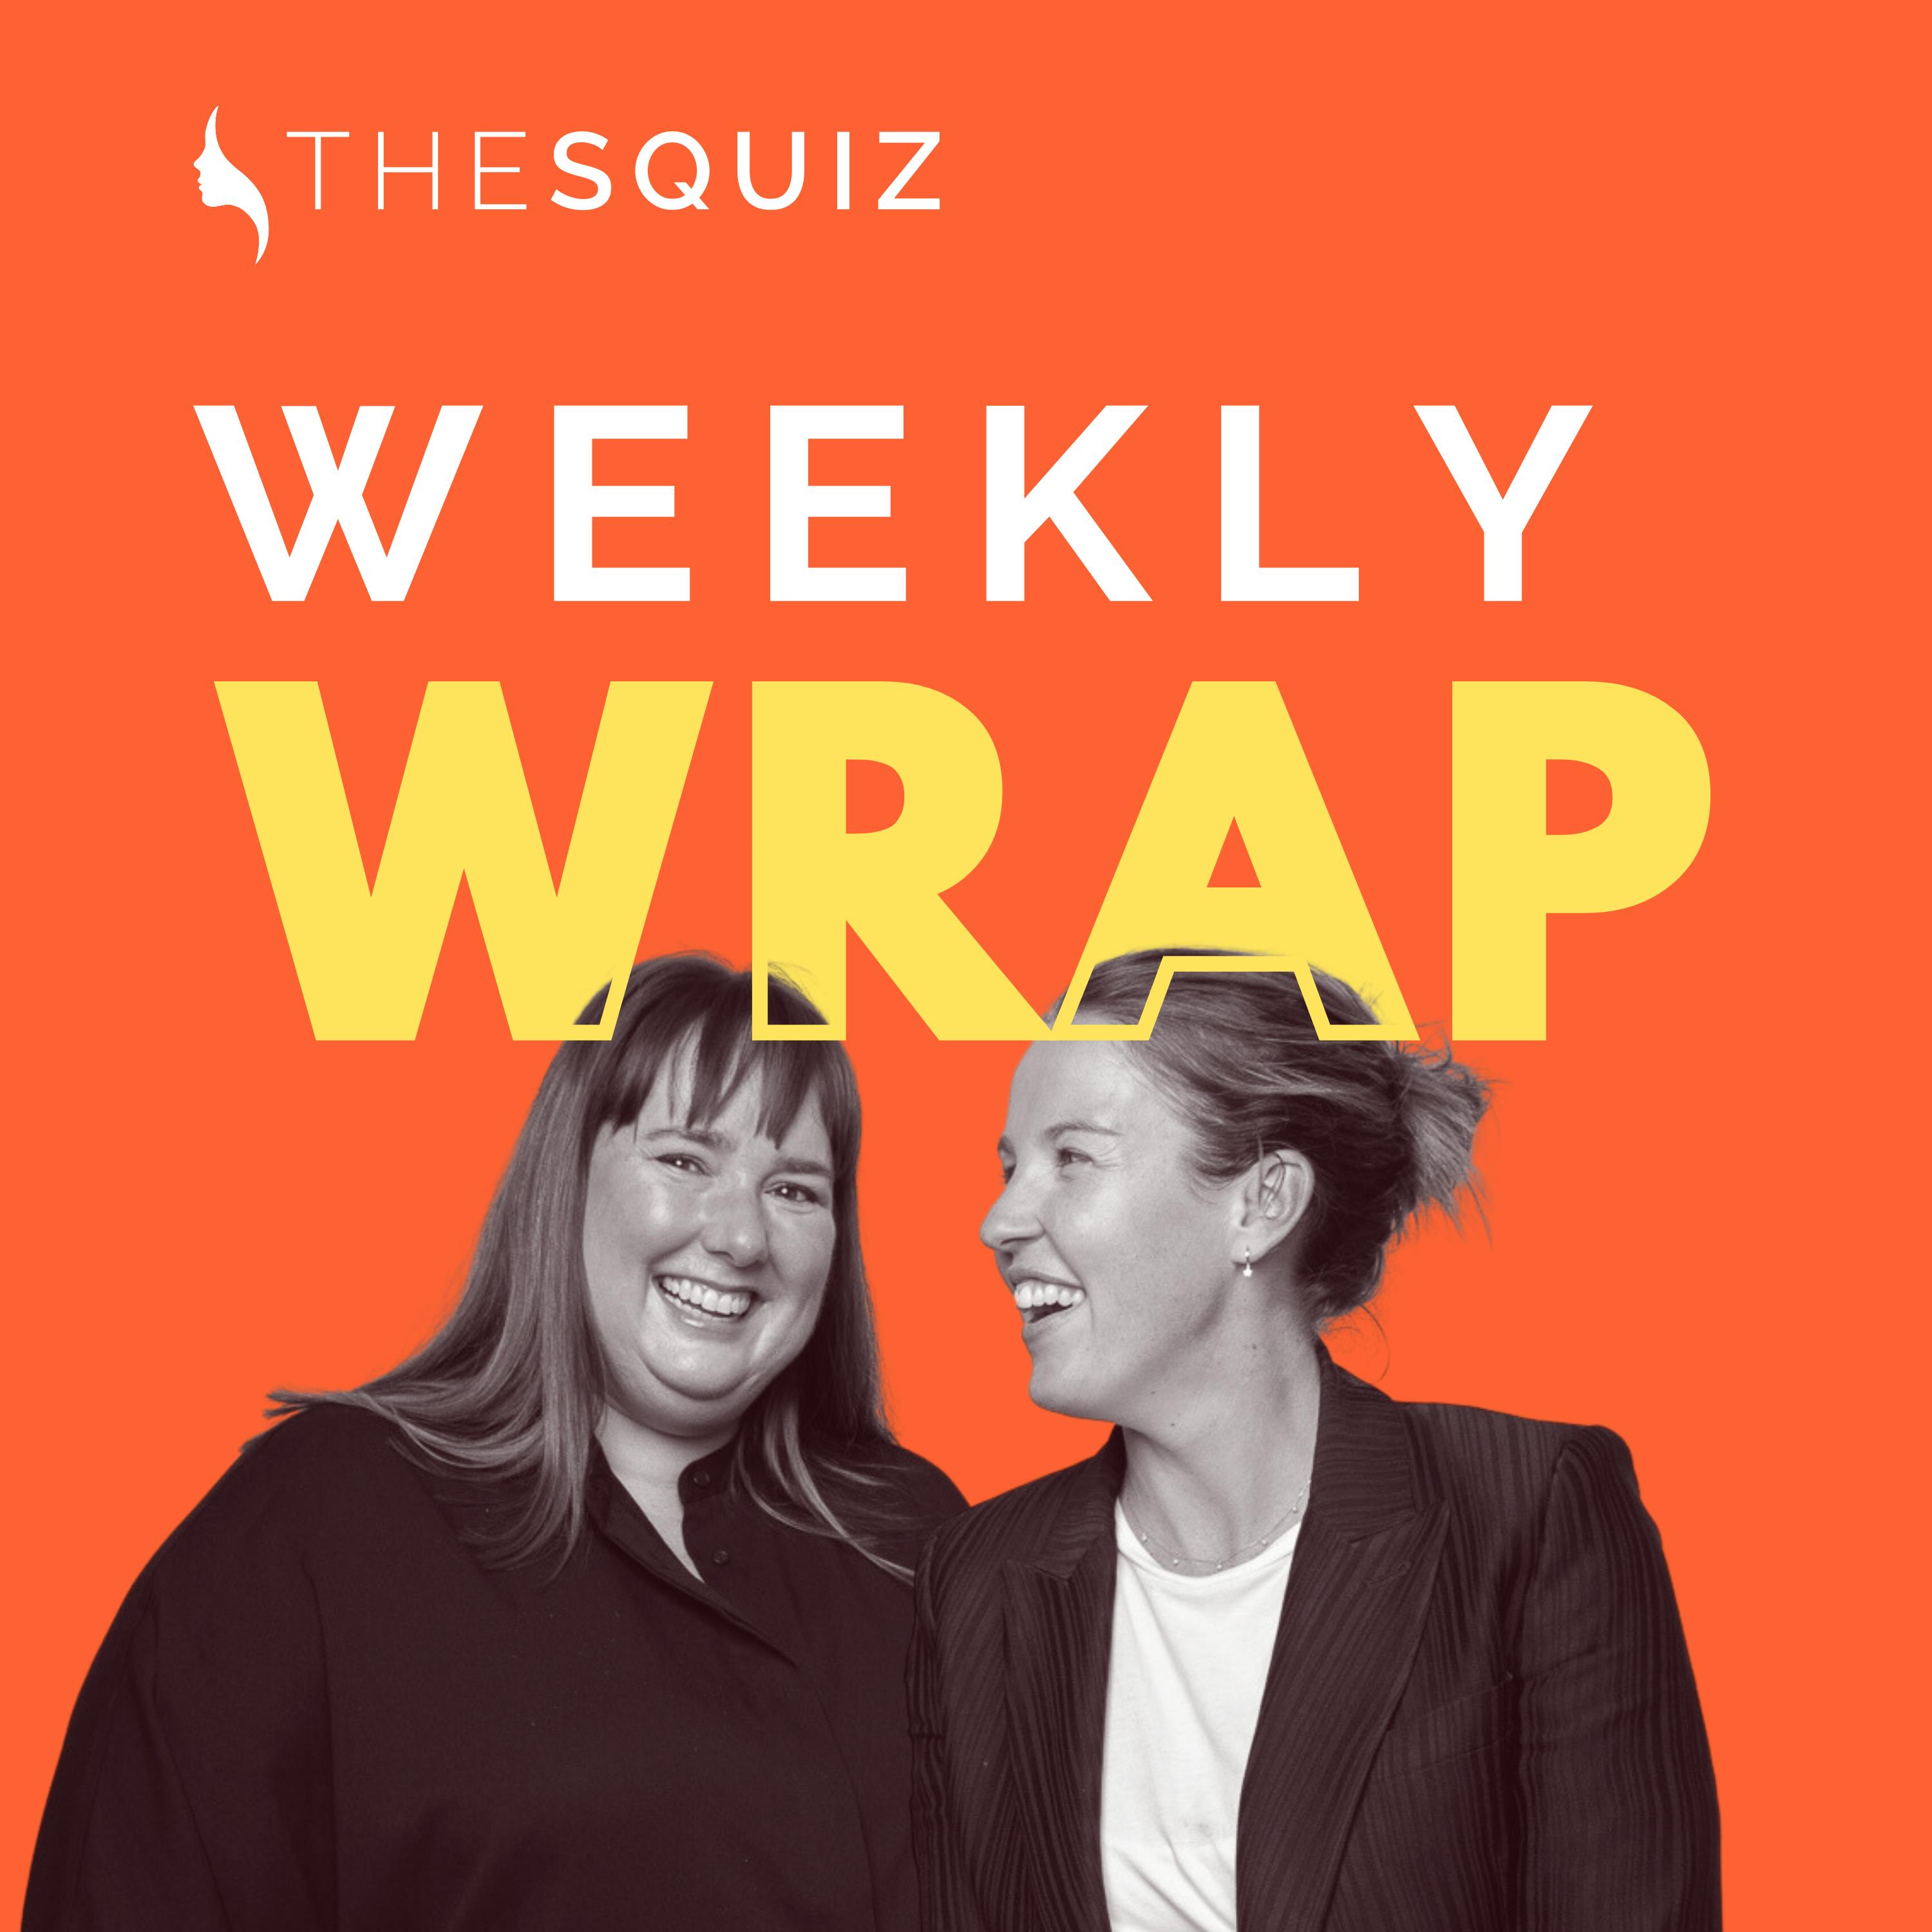 Weekly Wrap: Sam Kerr faces court, tweaks to paid parental leave, and 7 years of The Squiz